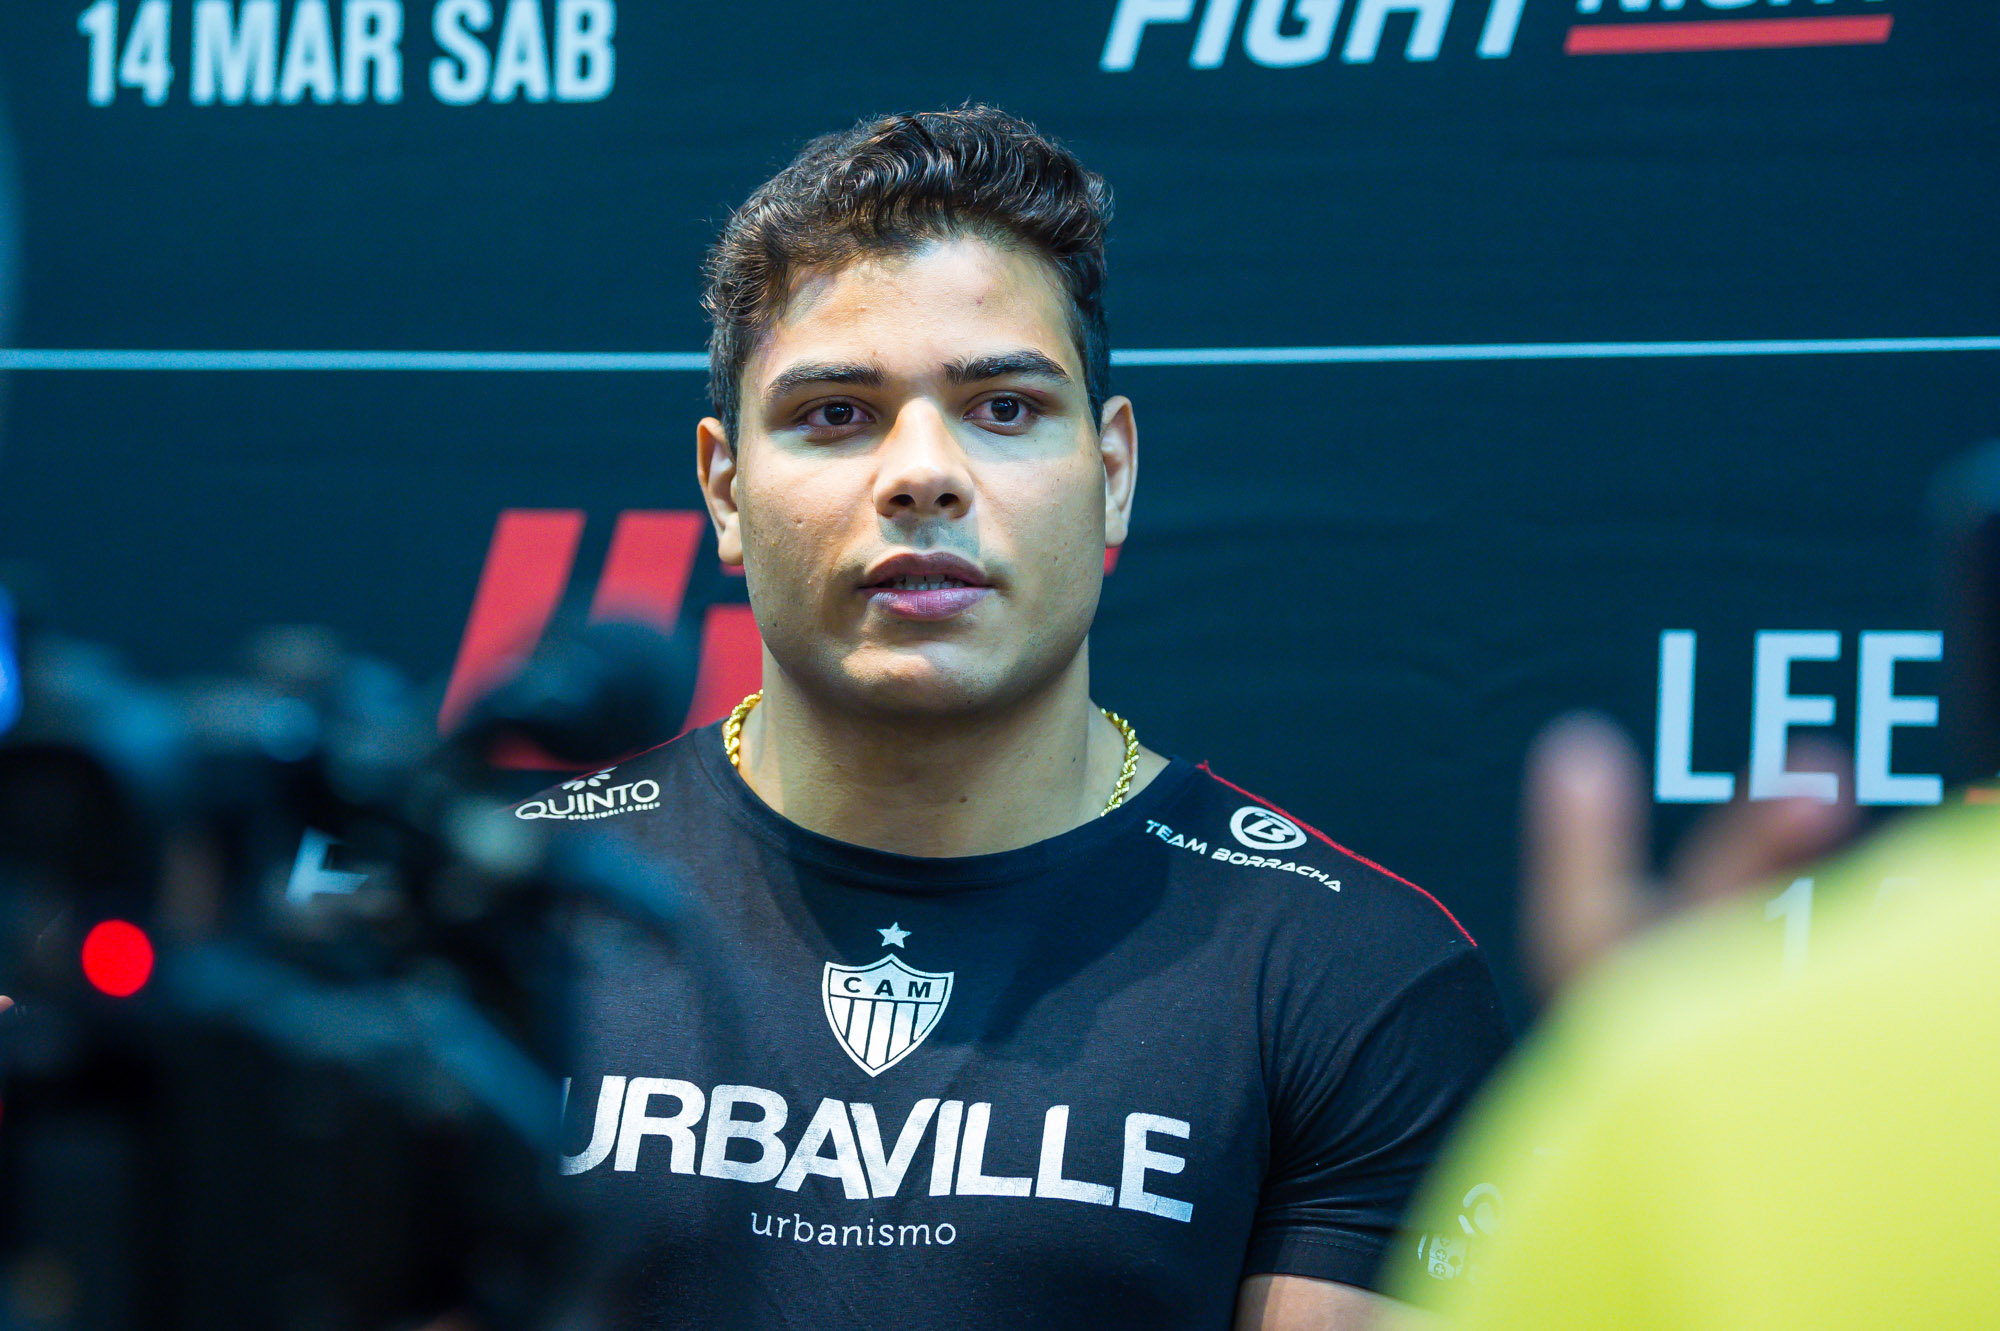 Paulo Costa is set to face Marvin Vettori on October 23.